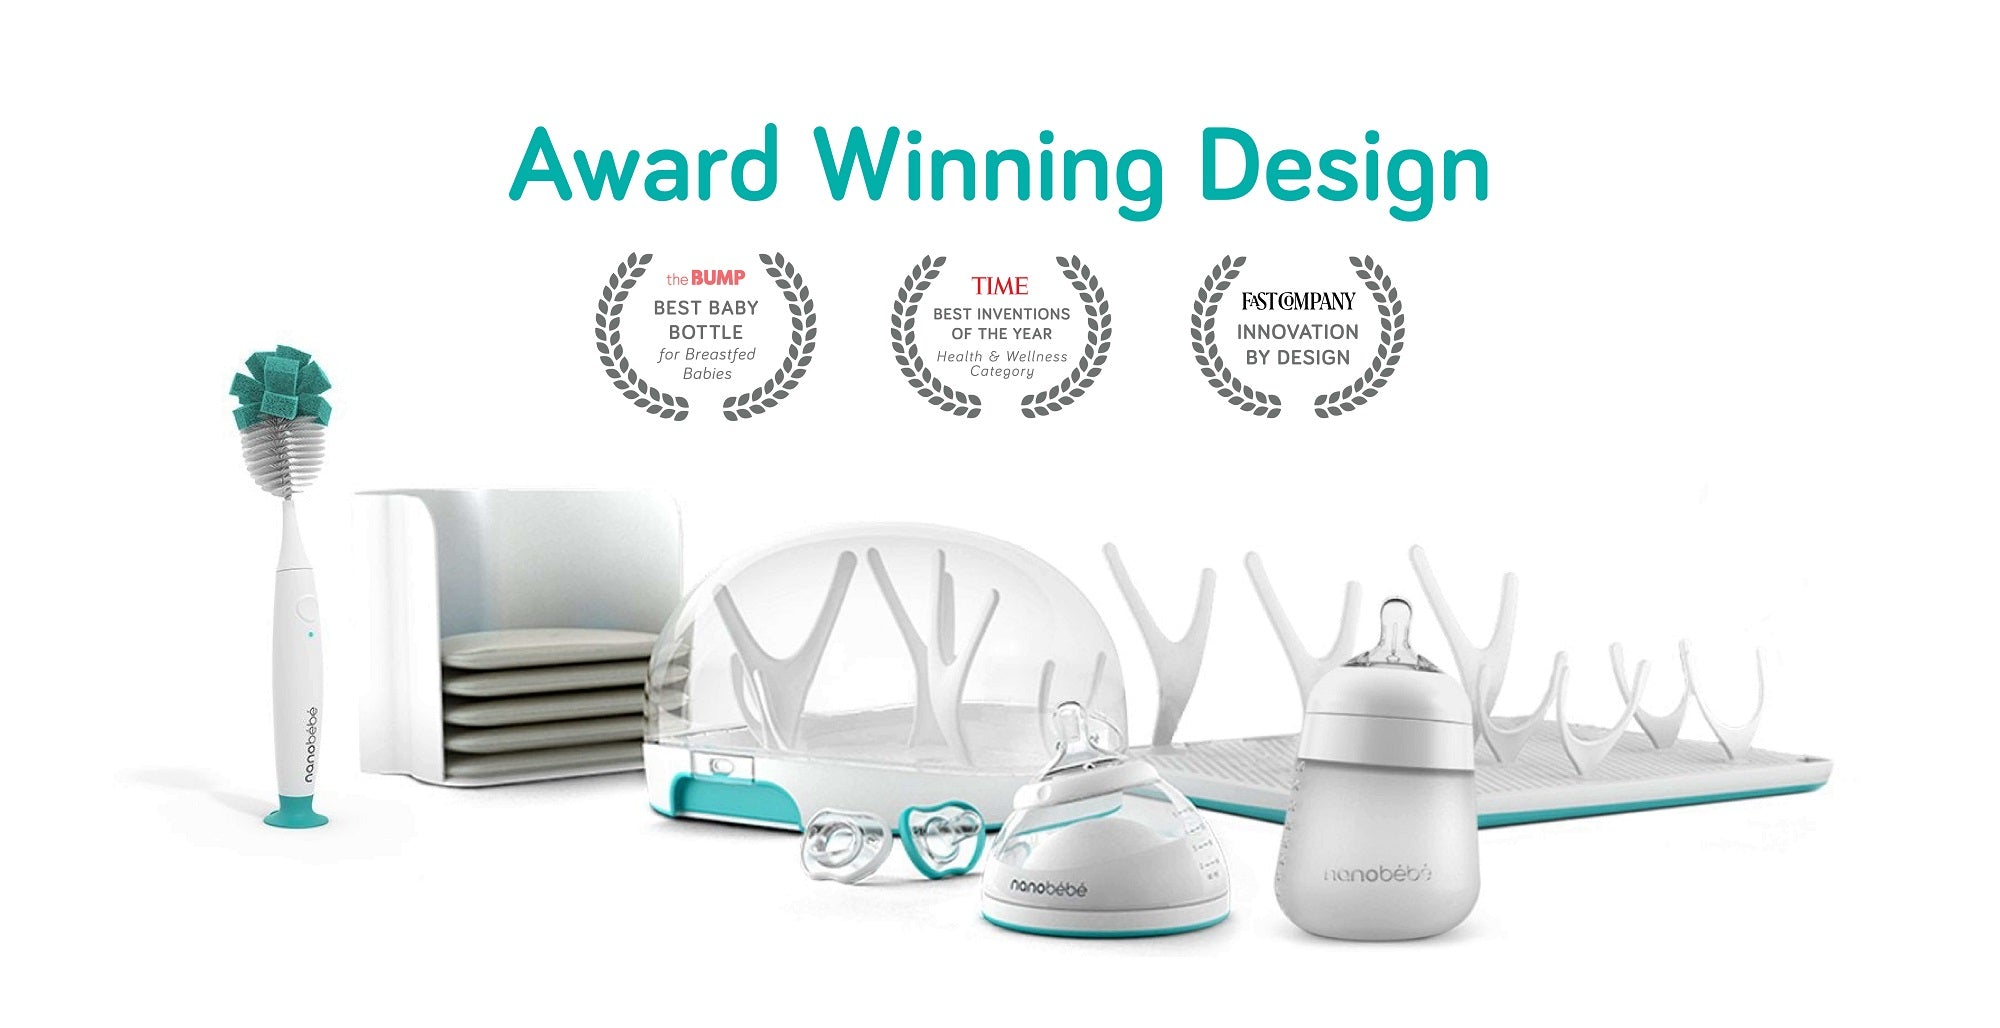 Award-winning design, including Best Baby Bottle for Breastfed Babies from The Bump, Best Innovation of the Year from Time Magazine, and Innovation by Design from Fast Company.